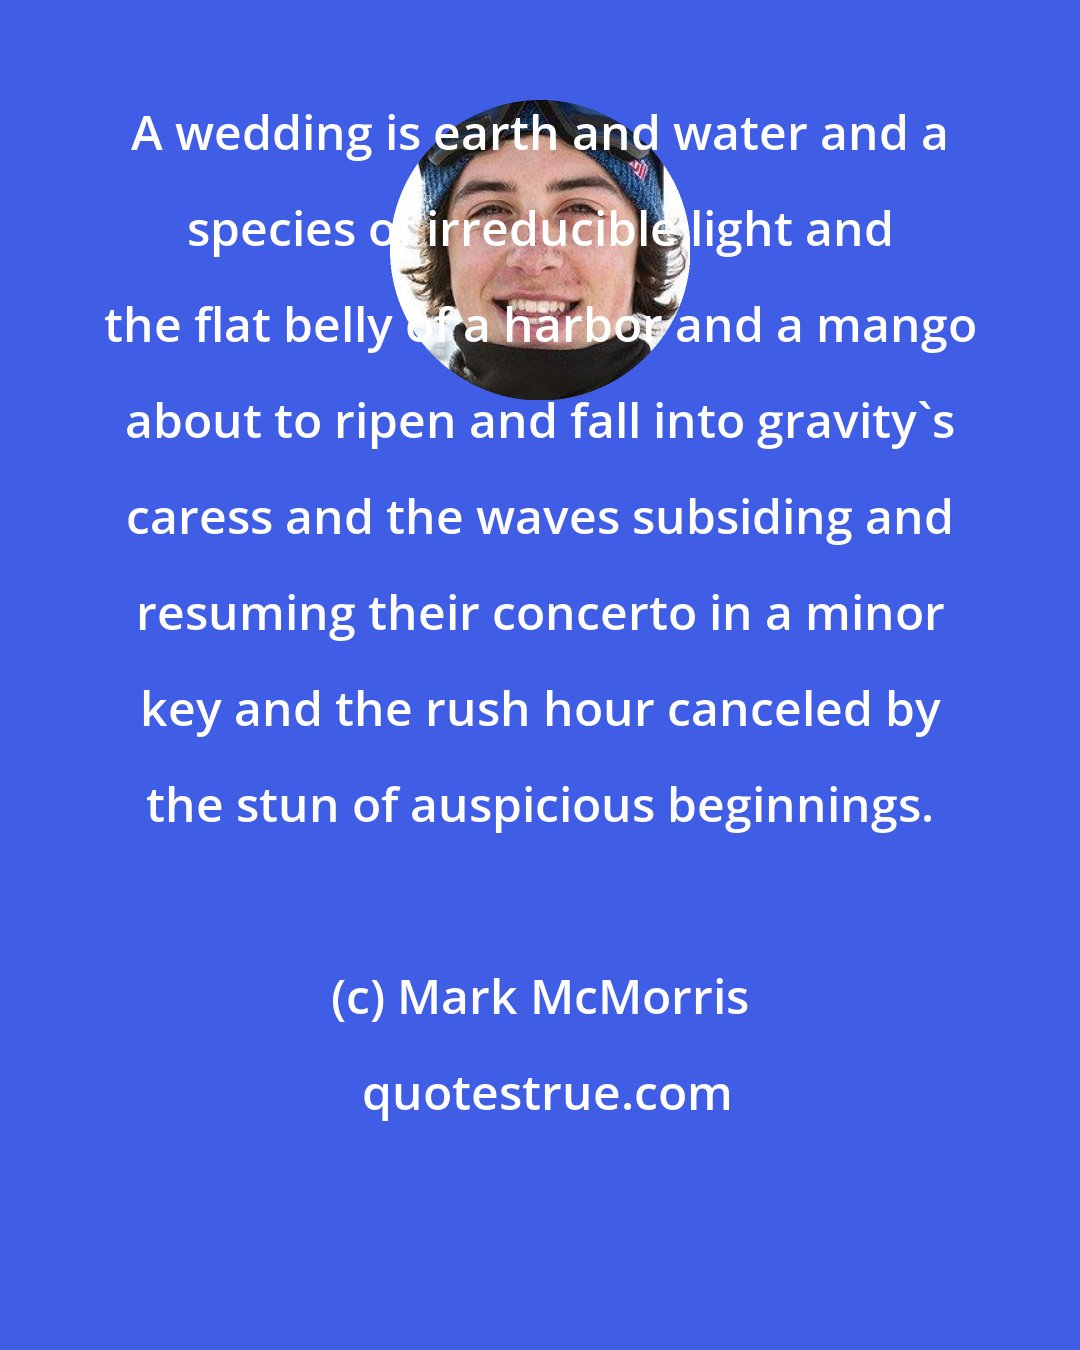 Mark McMorris: A wedding is earth and water and a species of irreducible light and the flat belly of a harbor and a mango about to ripen and fall into gravity's caress and the waves subsiding and resuming their concerto in a minor key and the rush hour canceled by the stun of auspicious beginnings.